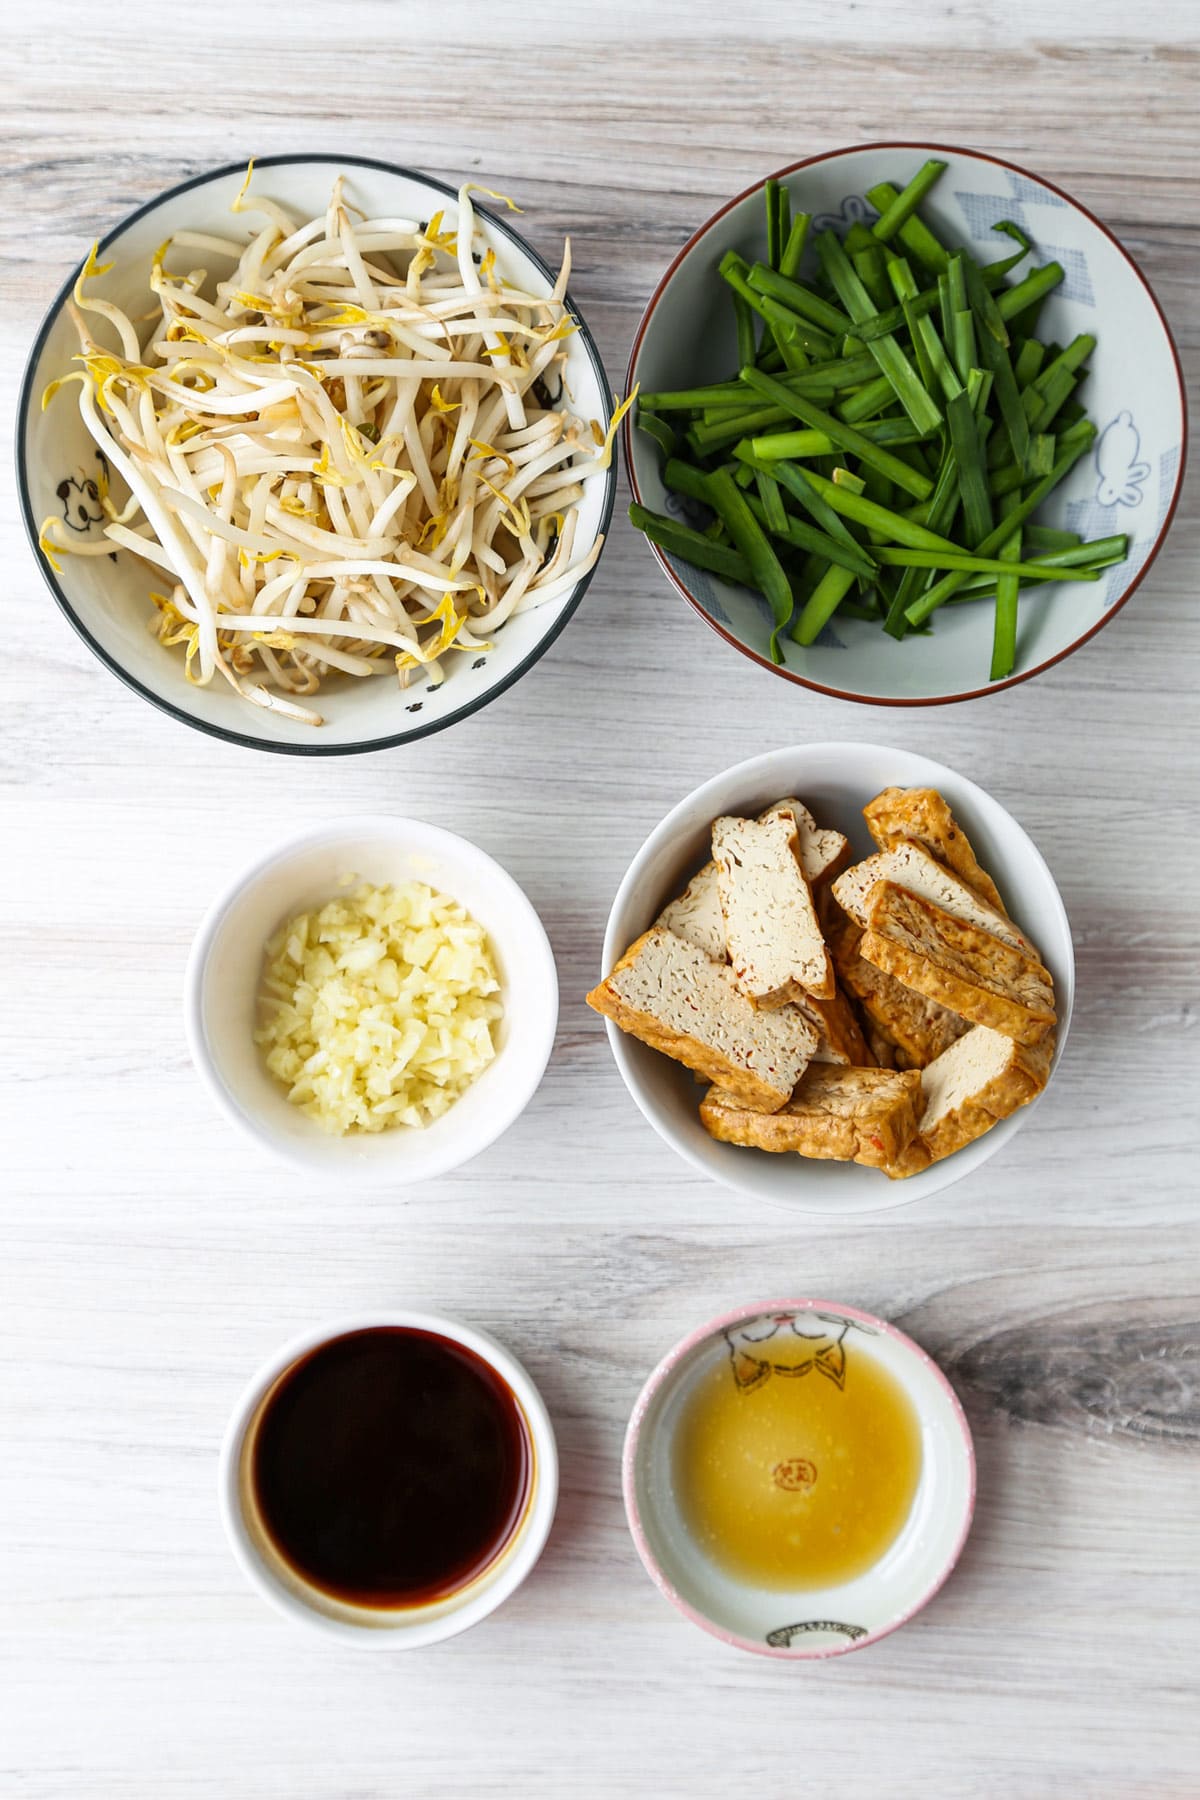 ingredients for bean sprouts tofu stir fry